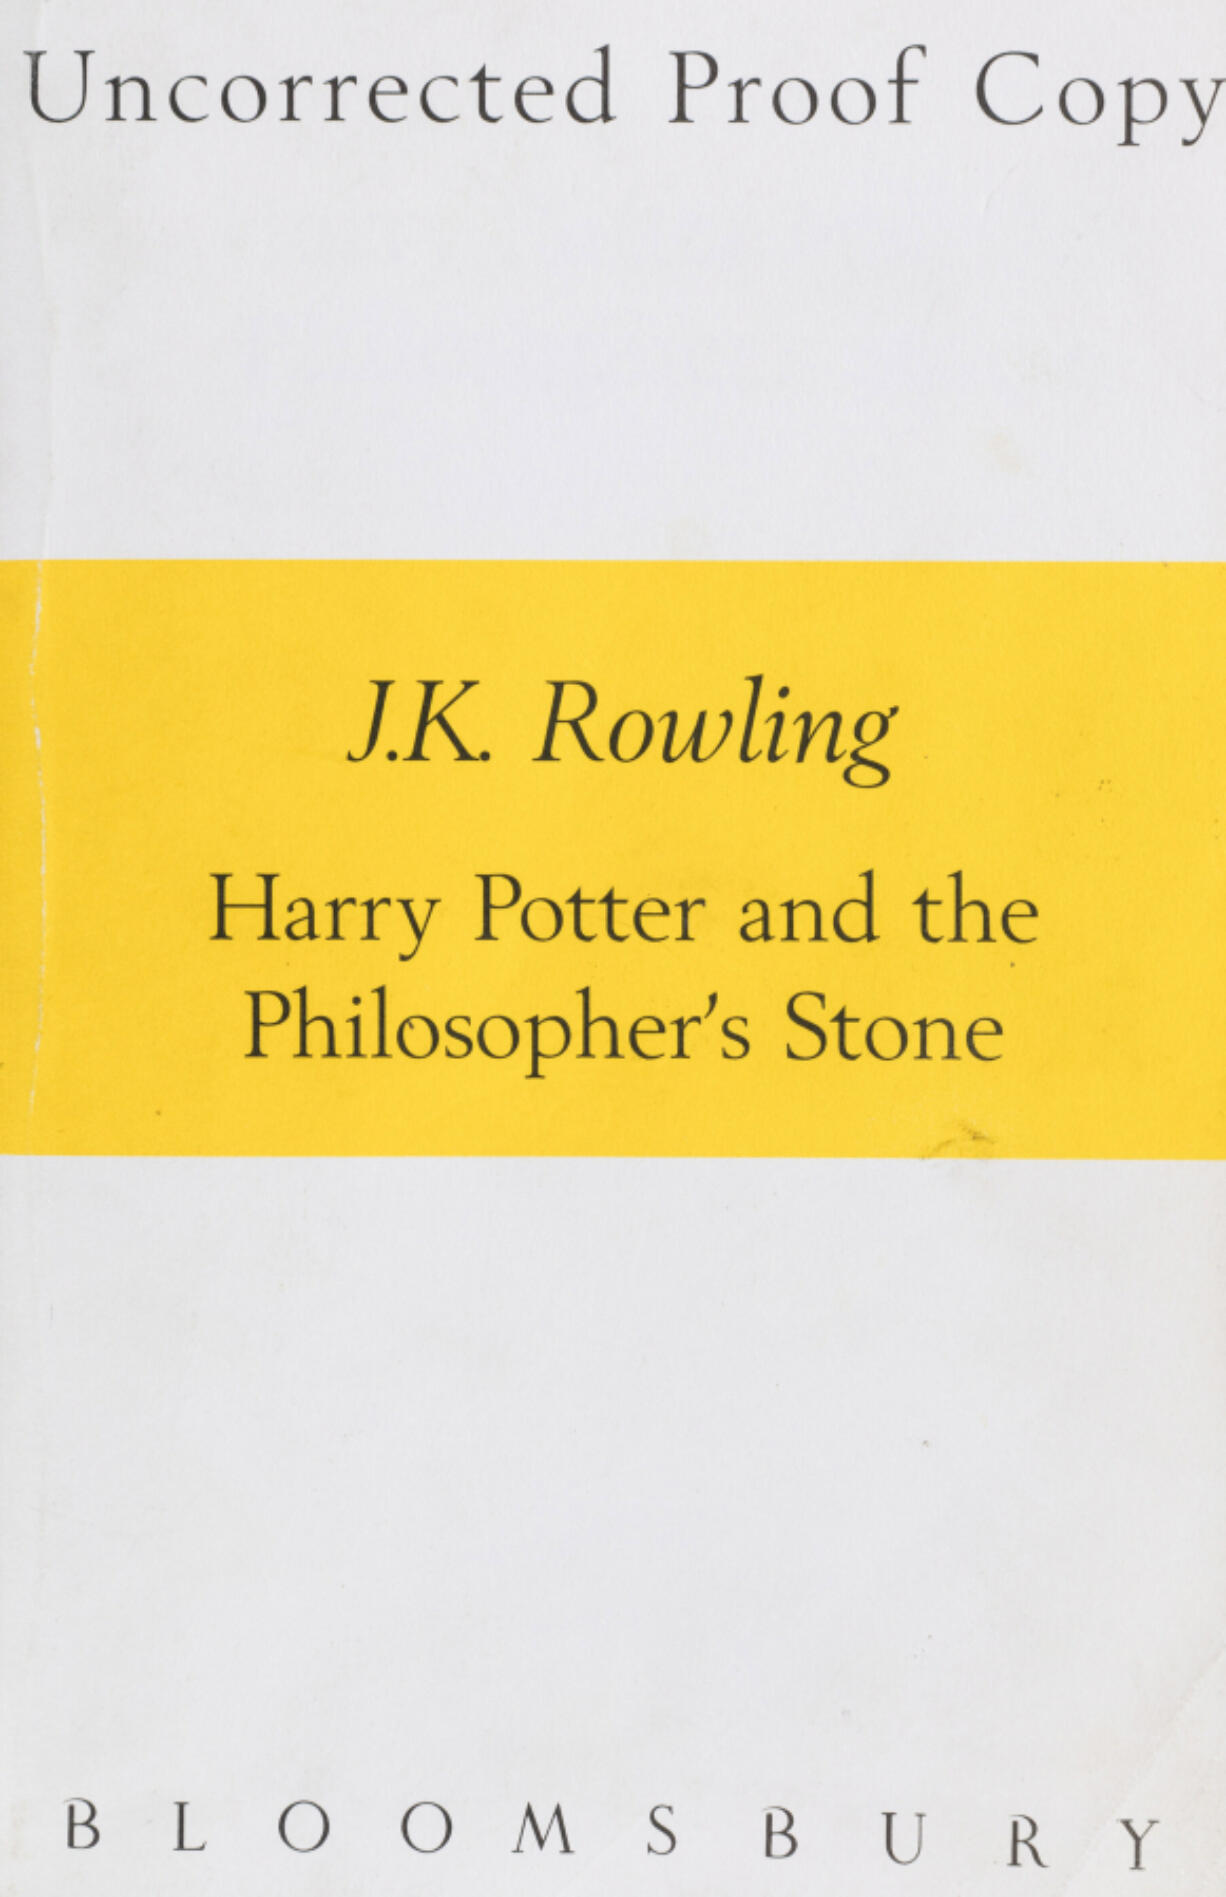 The uncorrected proof is one of only 200 ever made, the first time Harry Potter appeared in print and British author J.K. Rowling&rsquo;s debut novel.